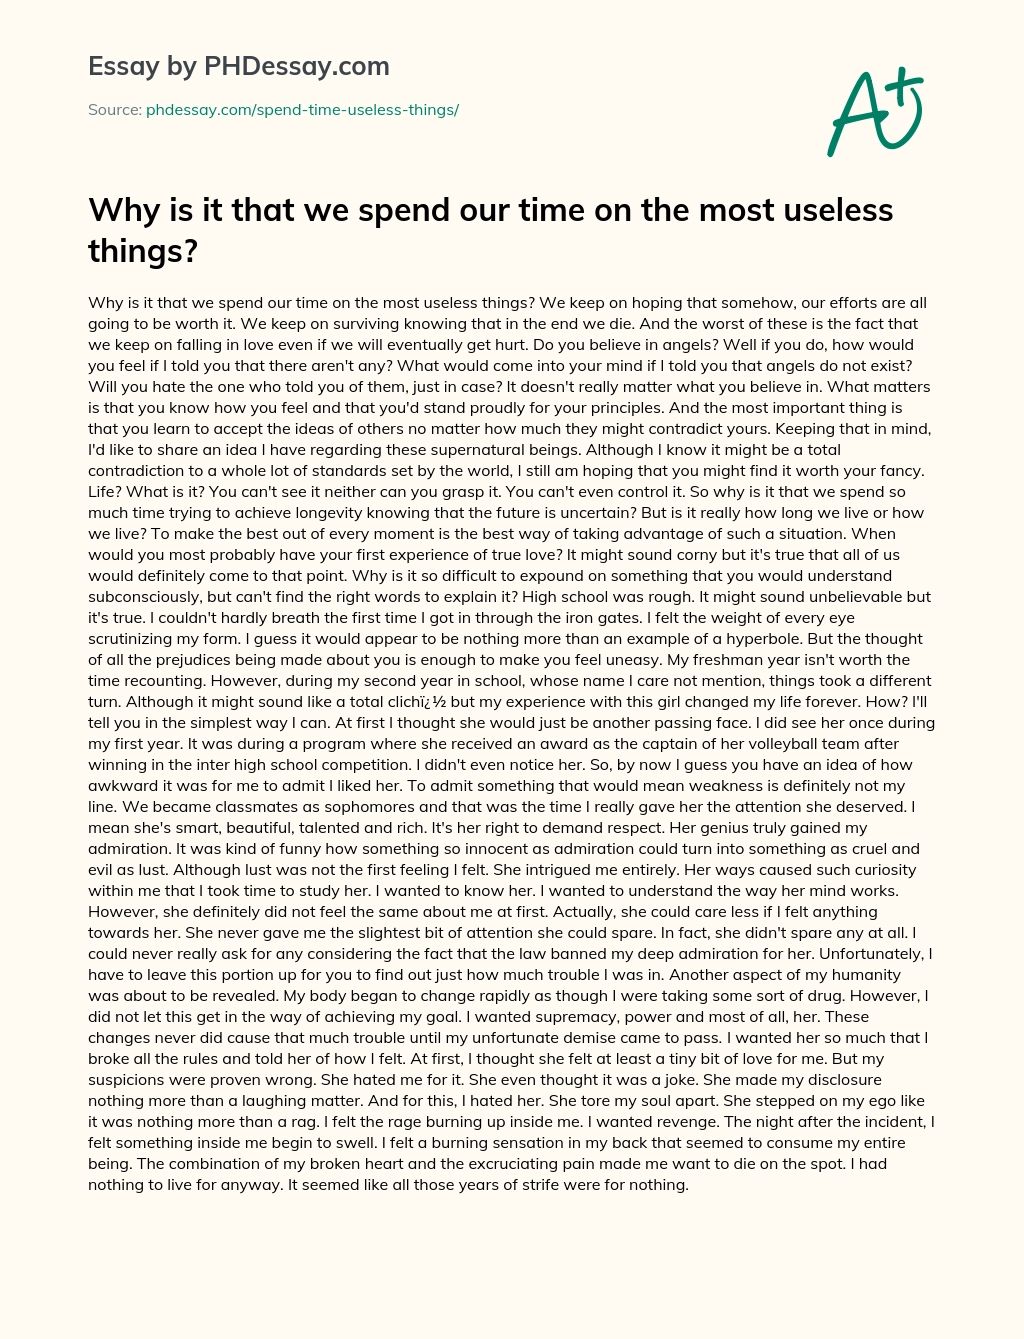 Why is it that we spend our time on the most useless things? essay